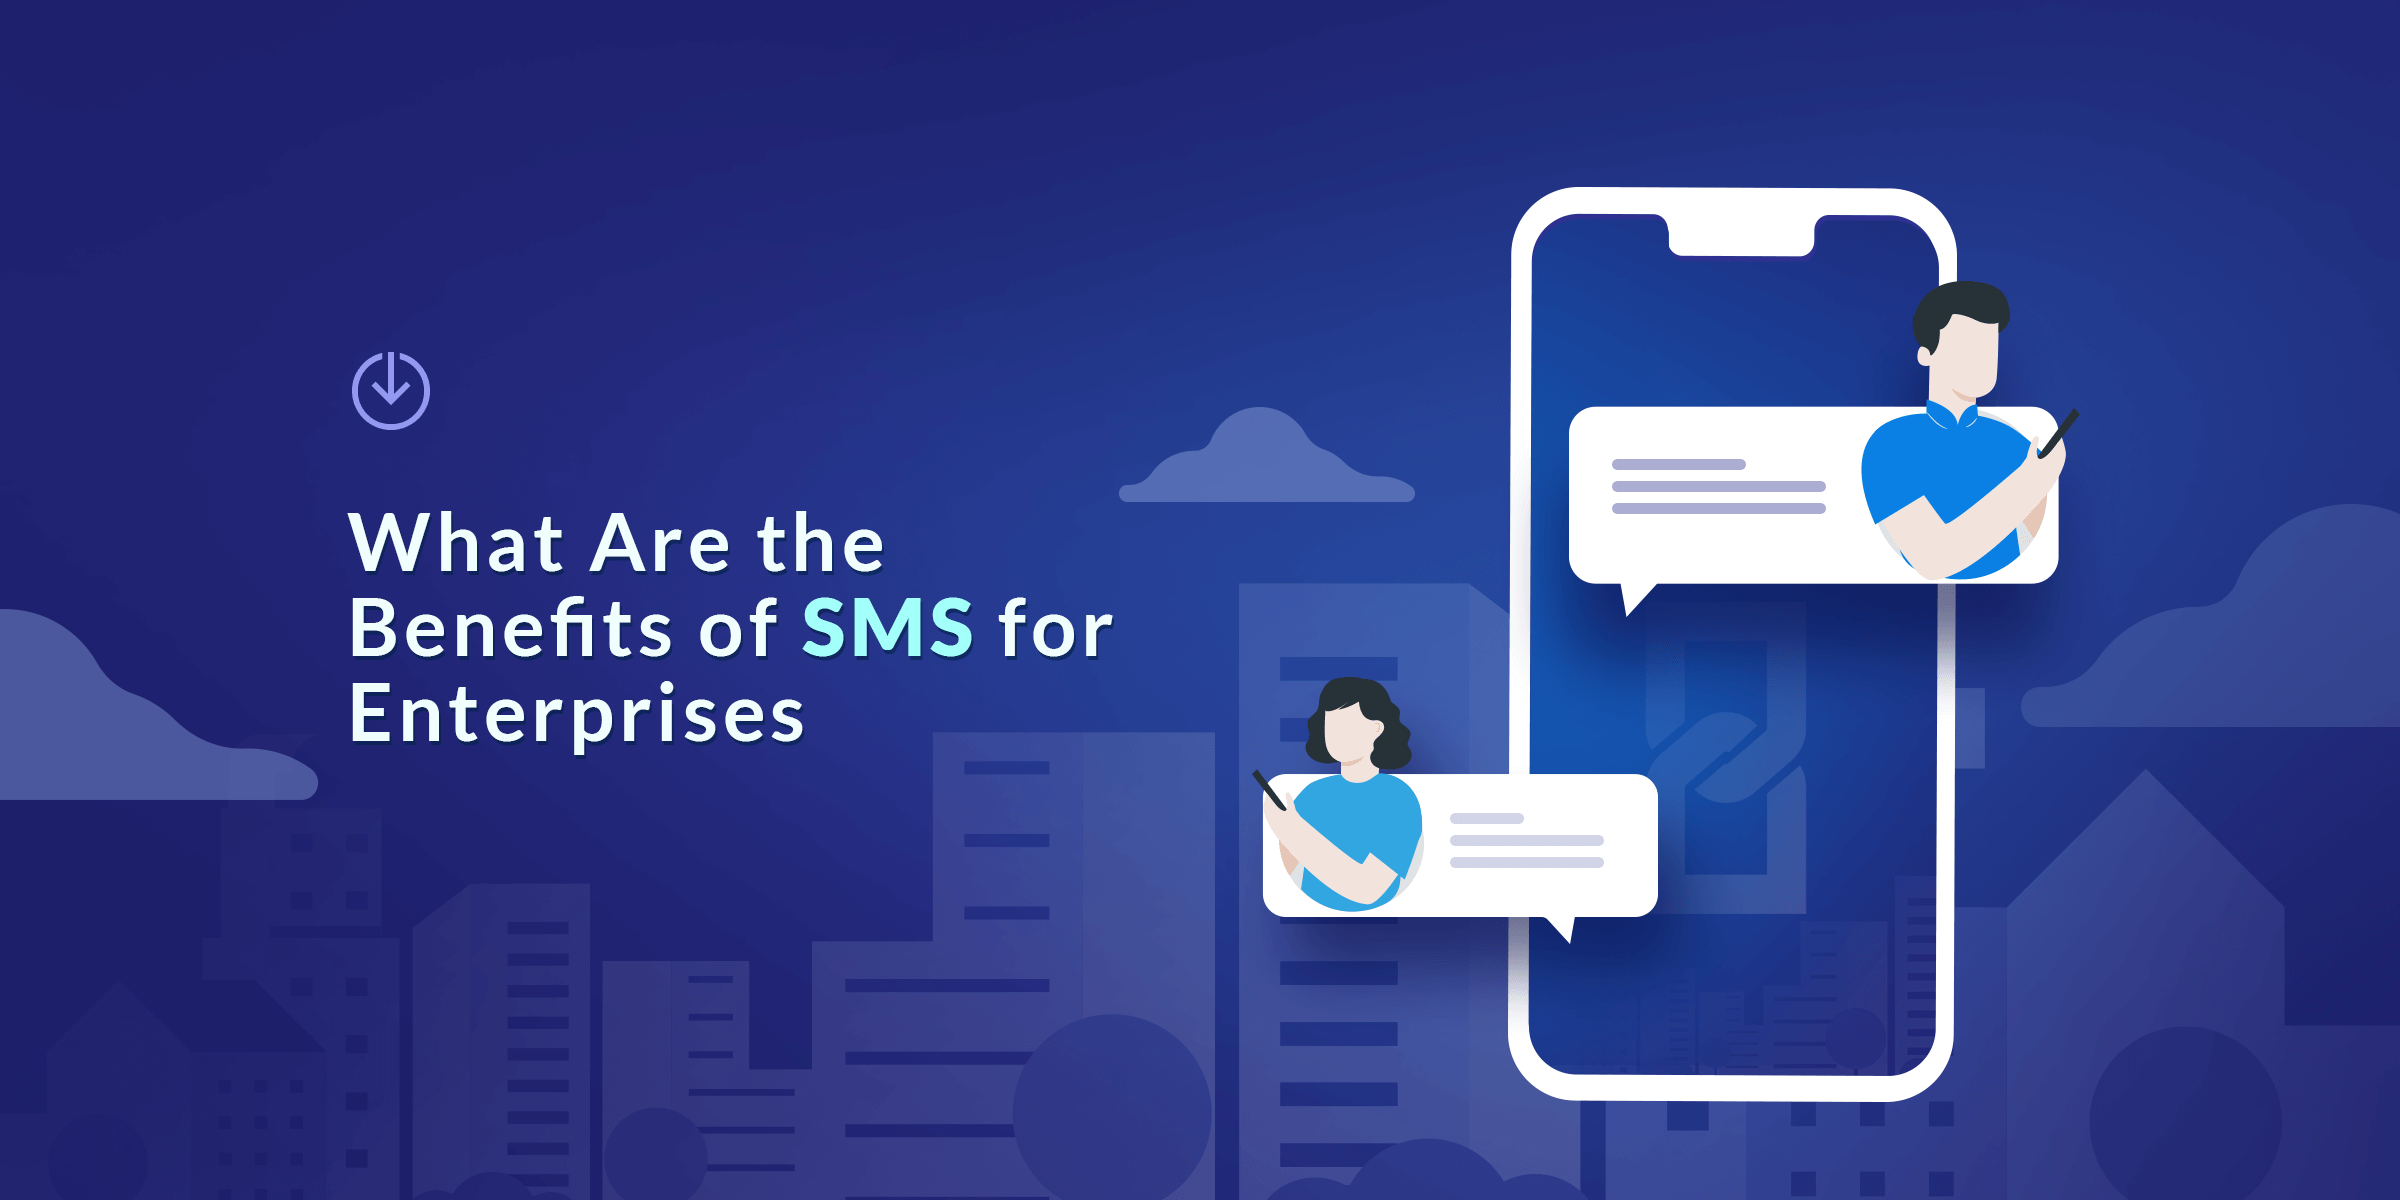 What Are Benefits of SMS for Enterprise